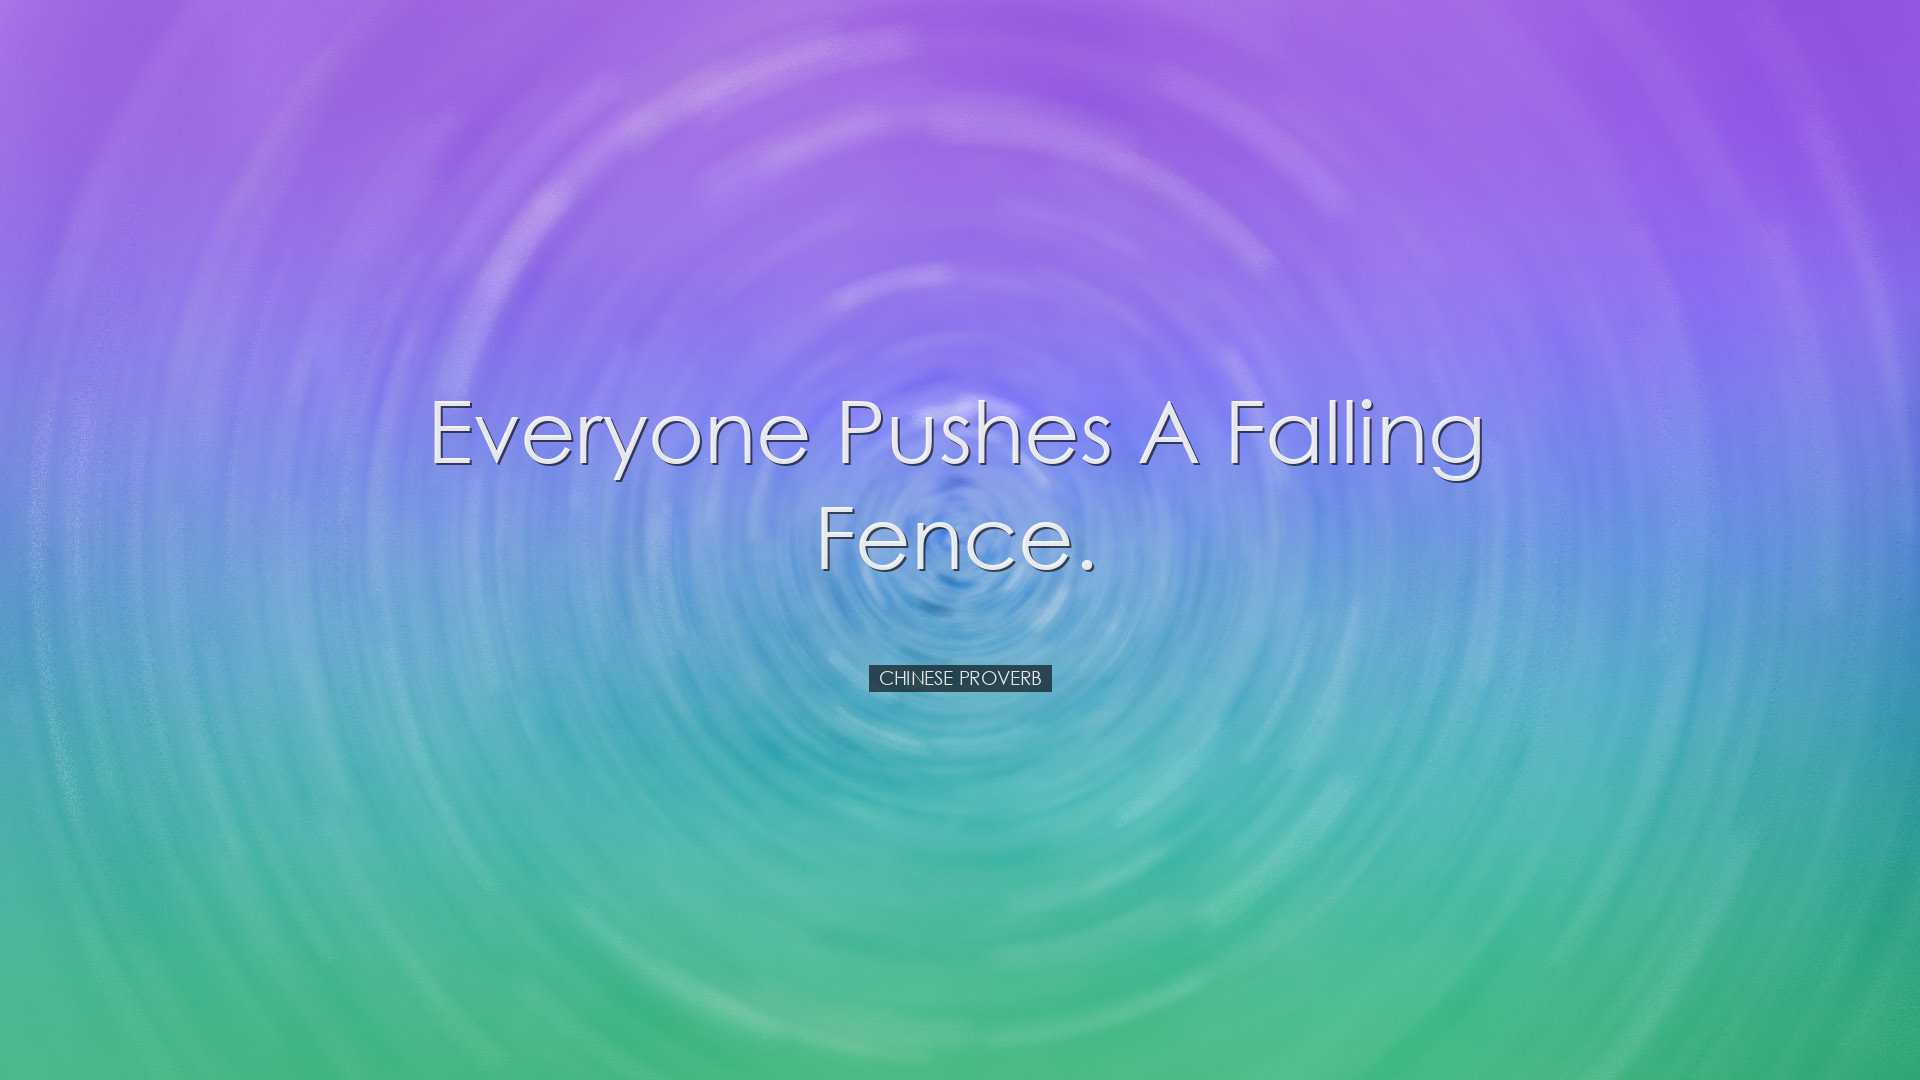 Everyone pushes a falling fence. - Chinese Proverb